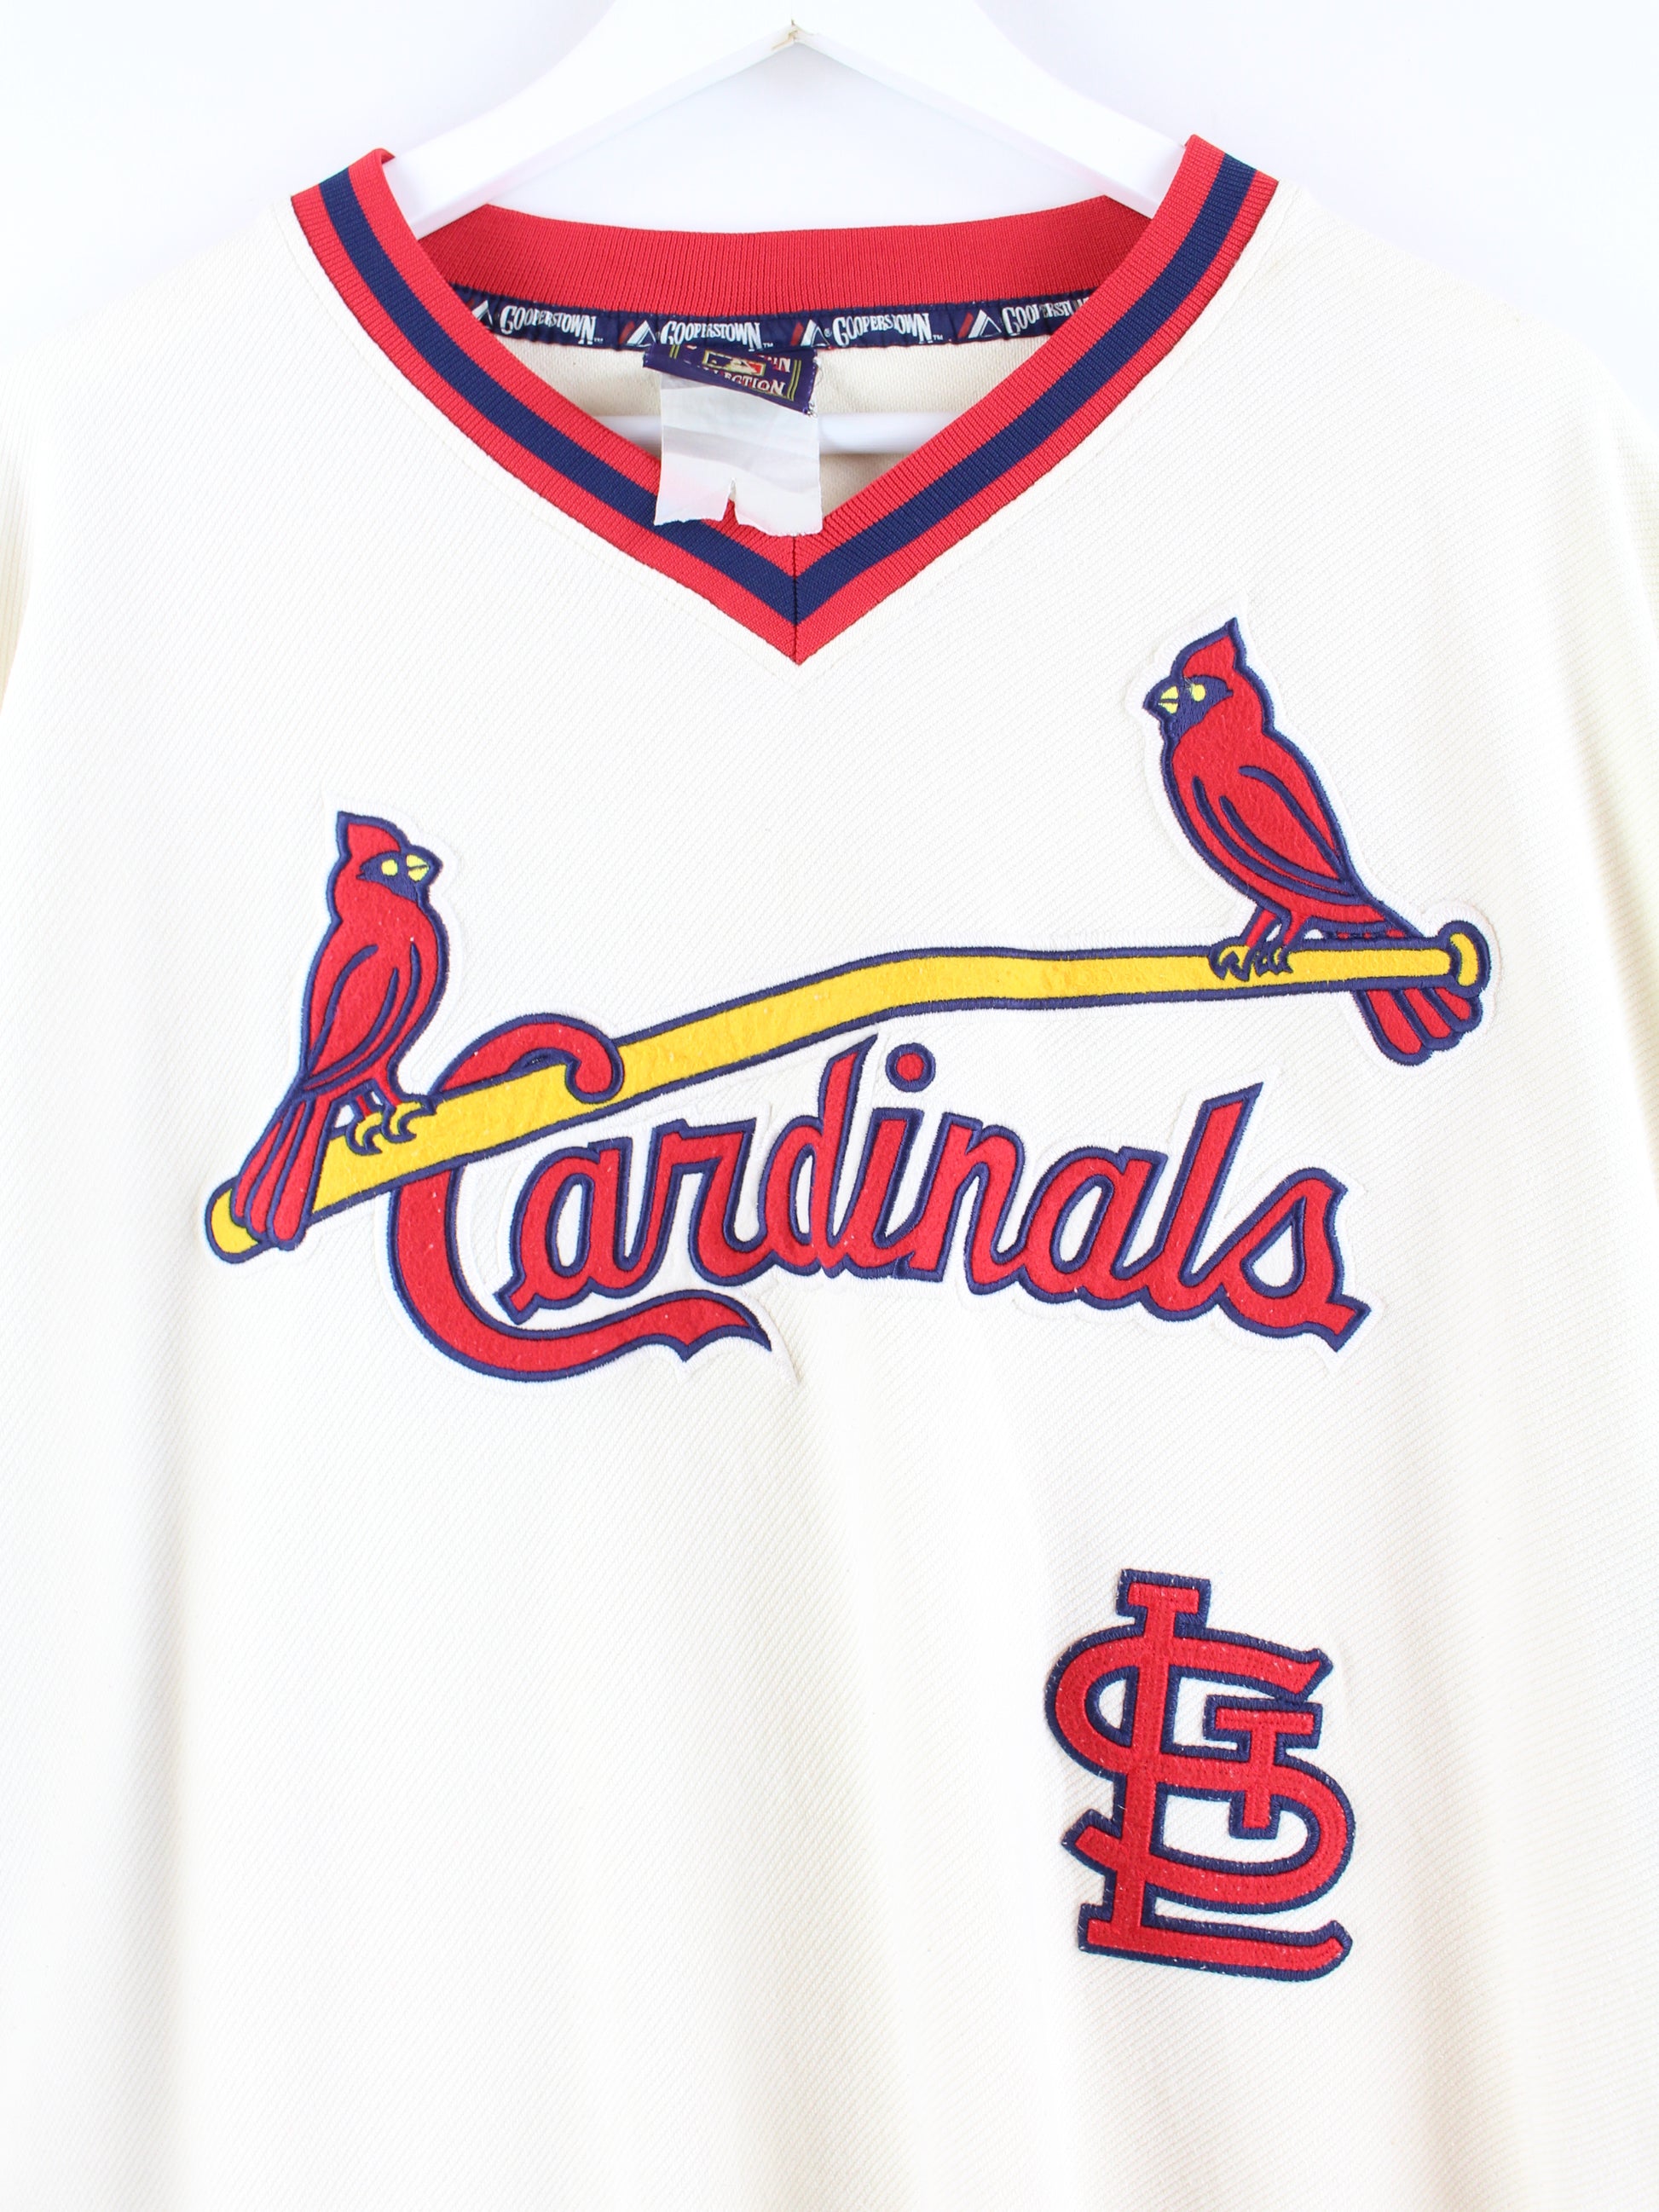 Vintage St. Louis Cardinals Majestic Cooperstown Collection 